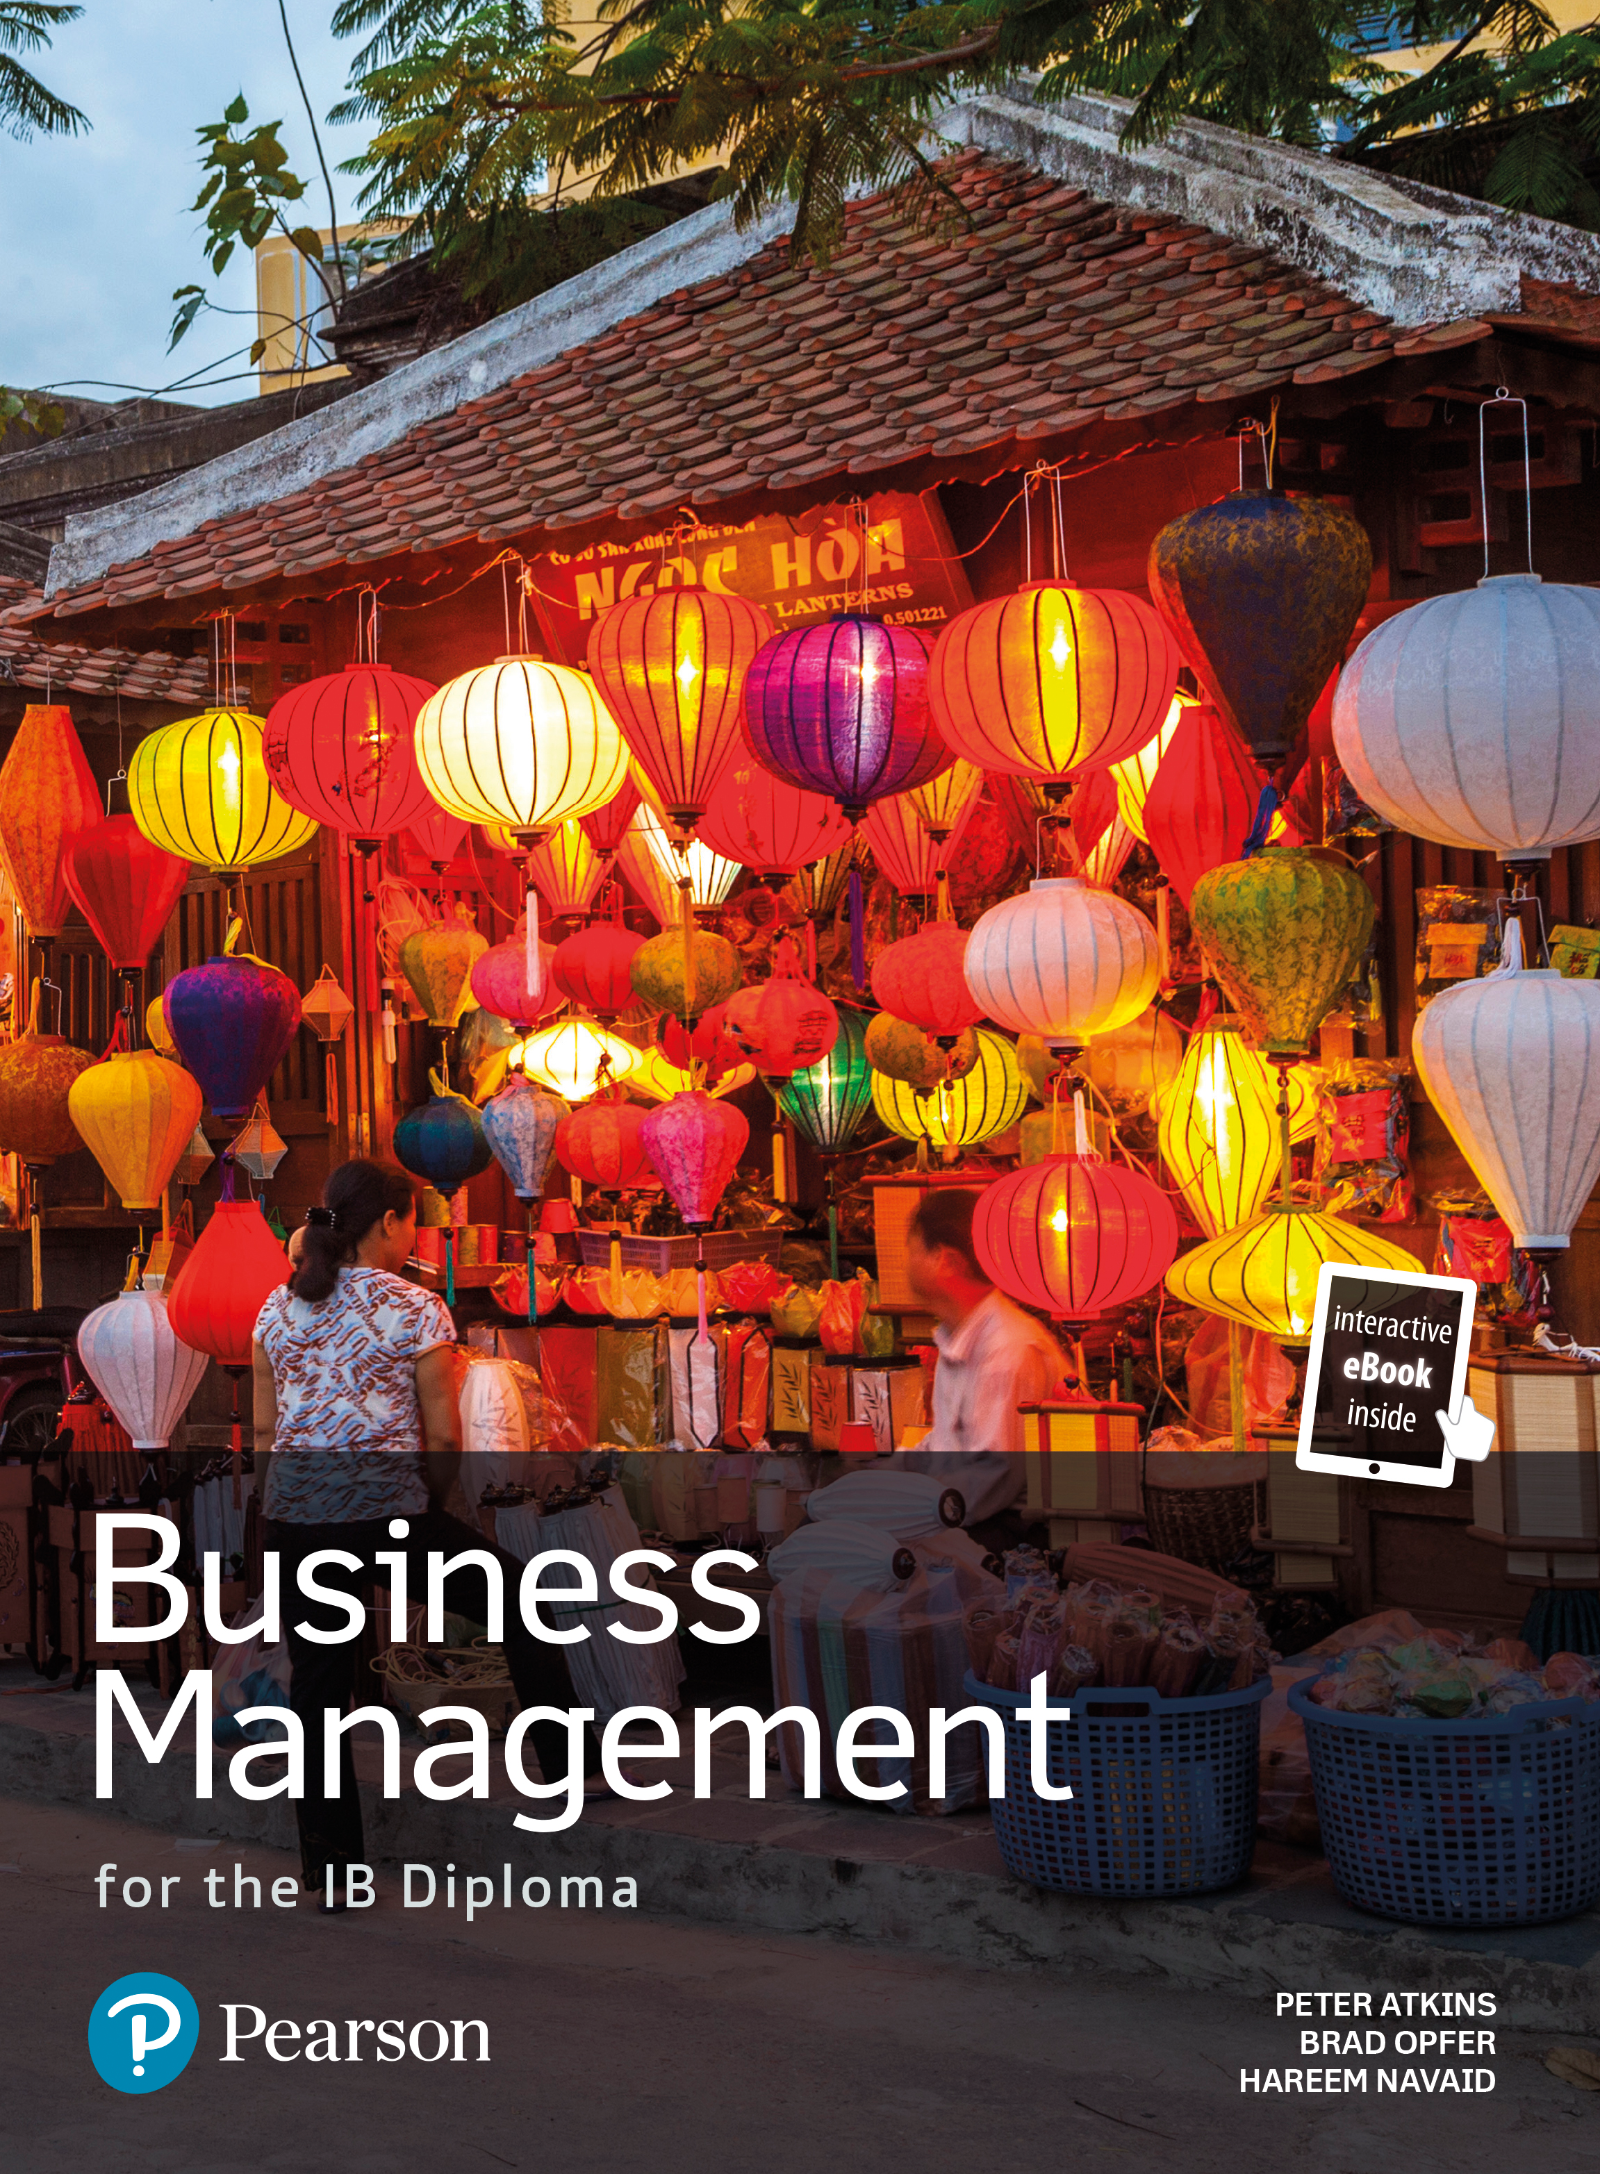 Pearson Business Management for the IB Diploma By Peter Atkins